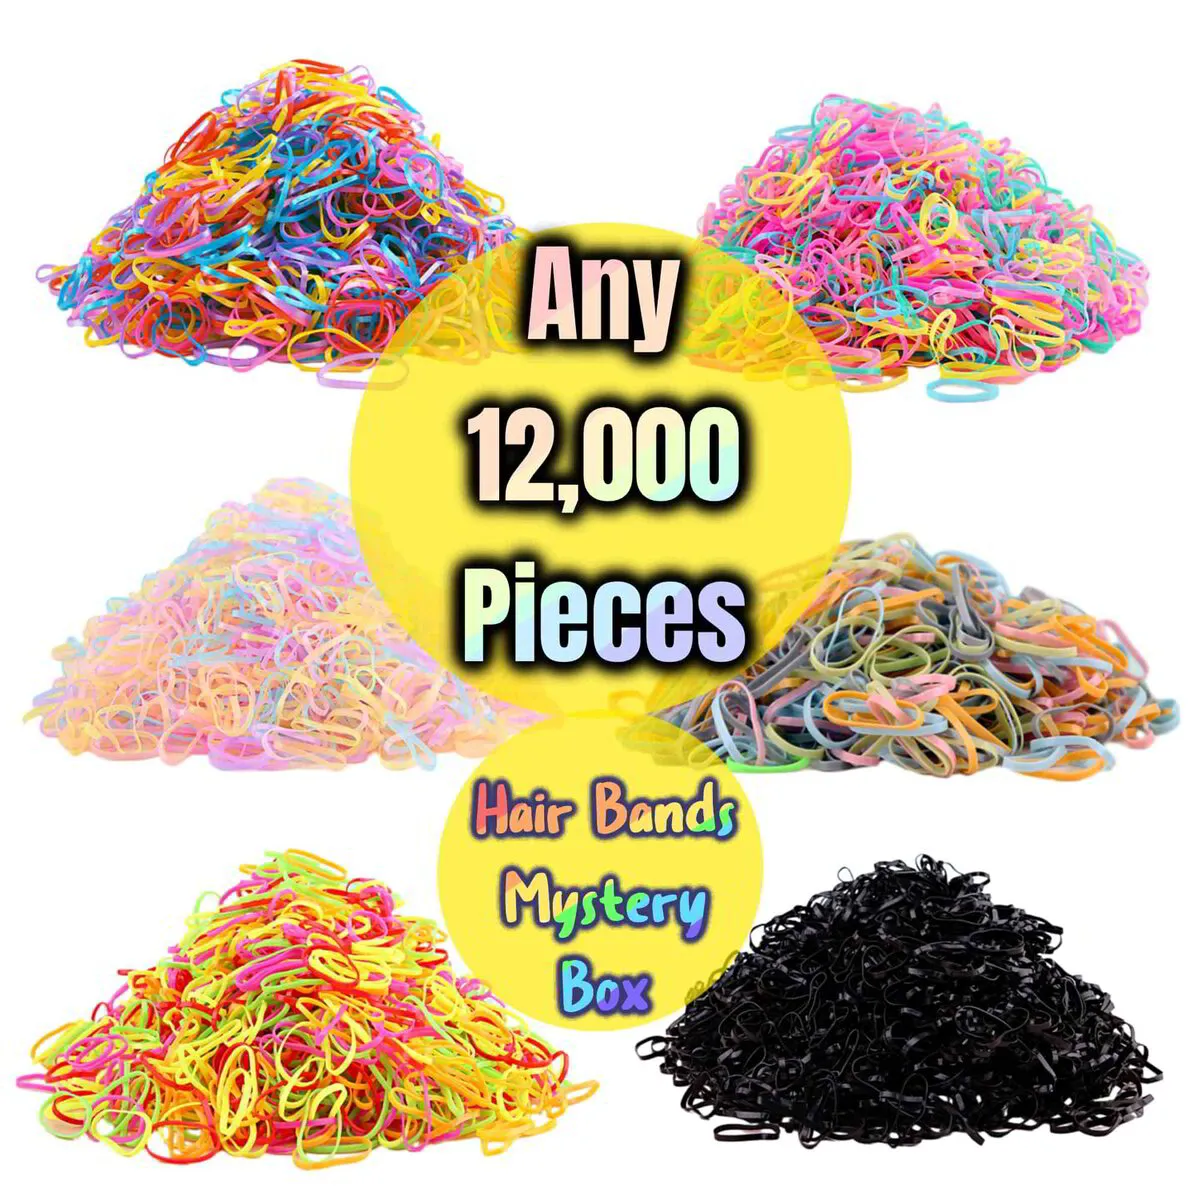 12,000 Pieces Mystery Box Hair Bands Gift For Kids Girls